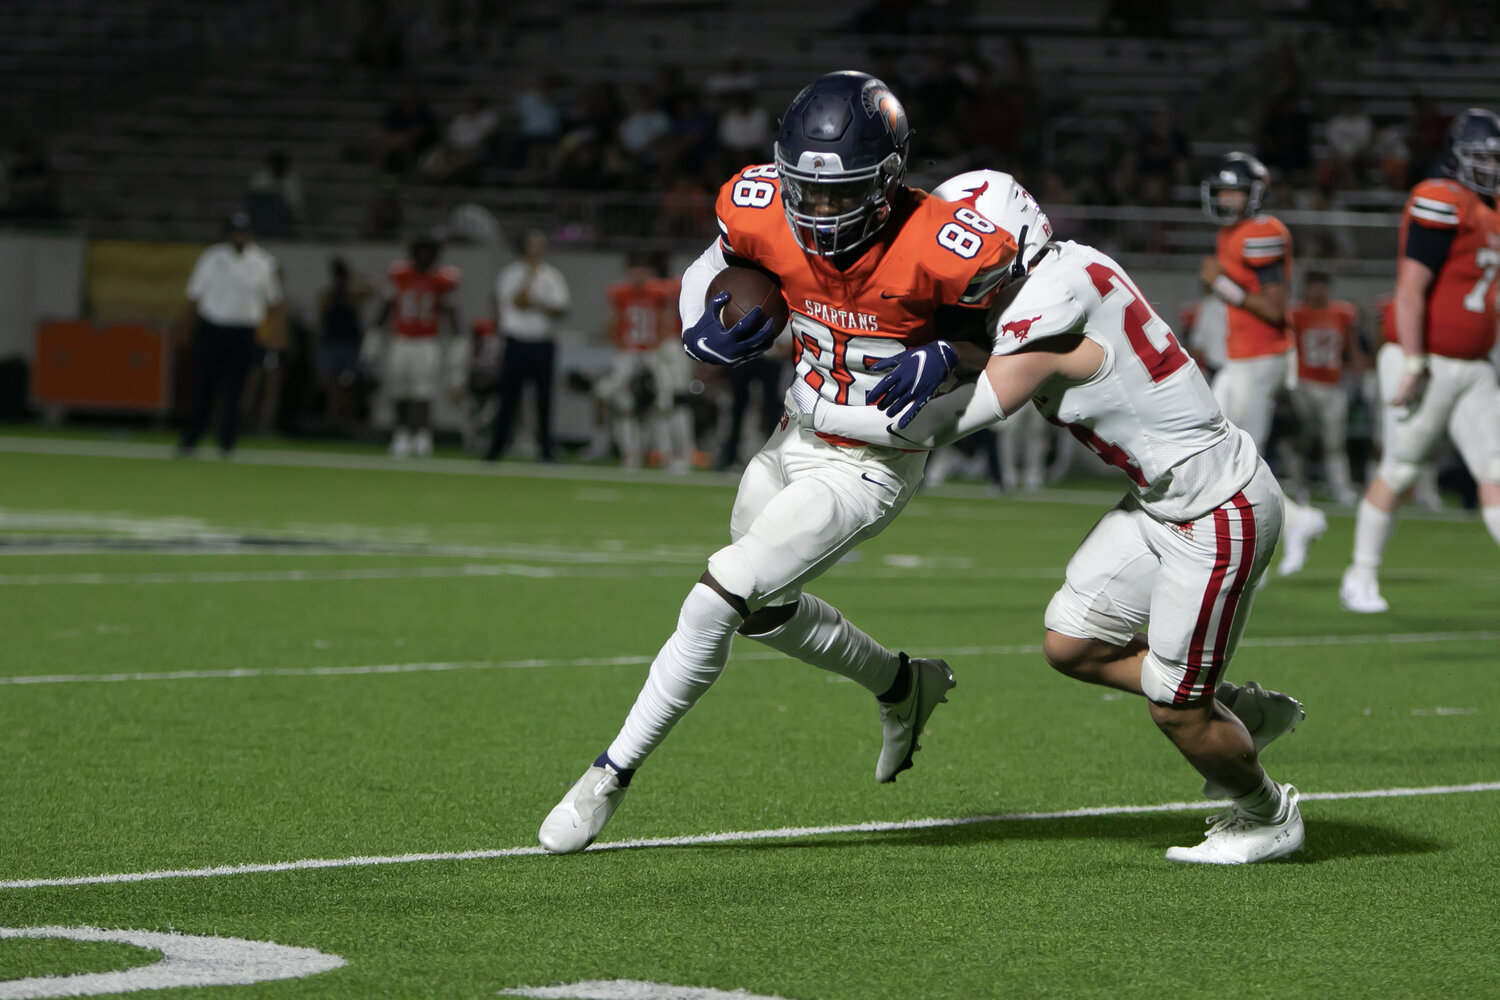 Ryan Fowler fights through a tackle during Thursday's game between Seven Lakes and Memorial at Legacy Stadium.